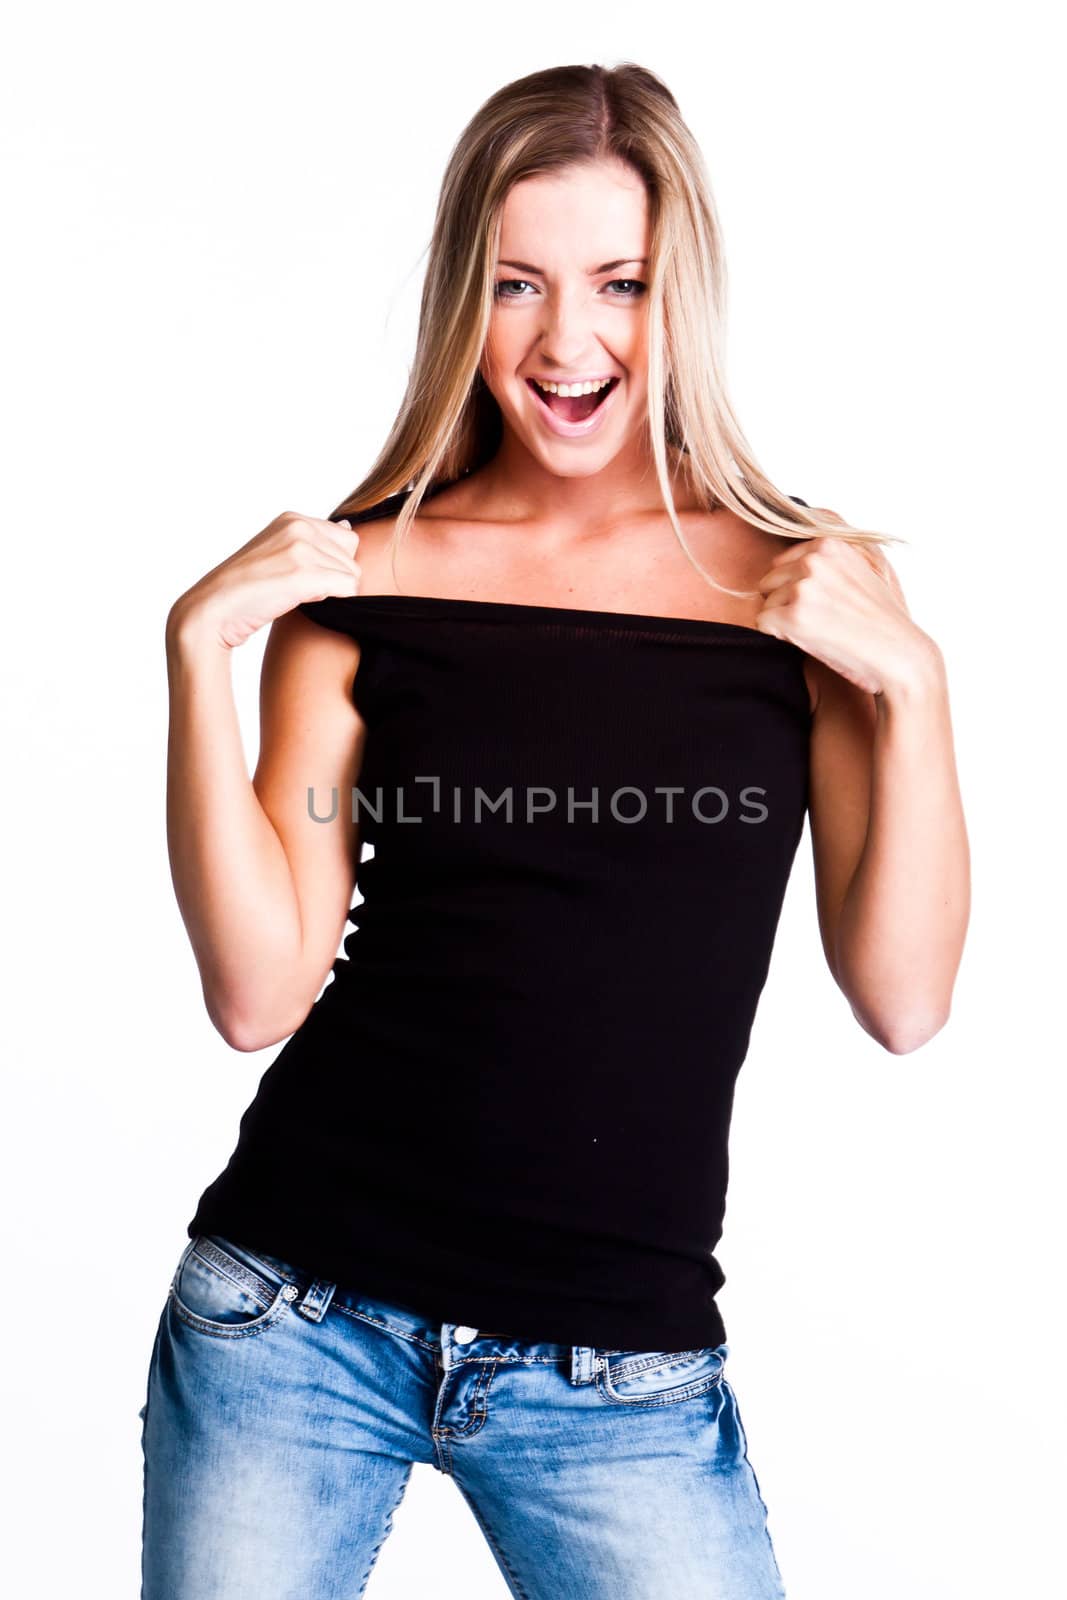 Young, beautiful and happy woman in a black shirt and blue jeans